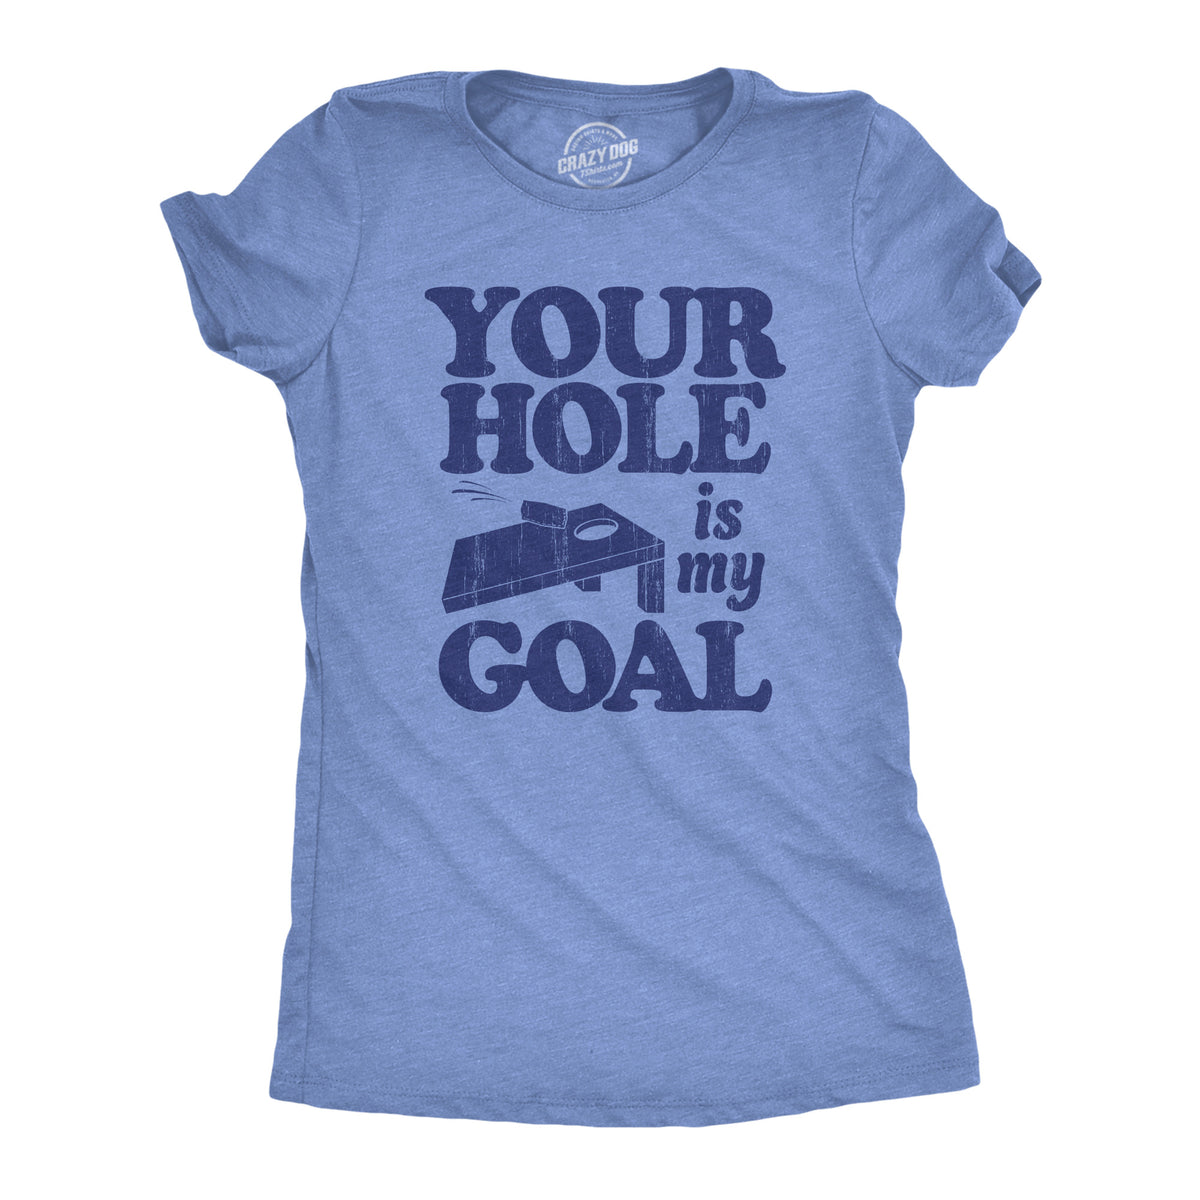 Funny Light Heather Blue - GOAL Your Hole Is My Goal Womens T Shirt Nerdy Sarcastic Tee